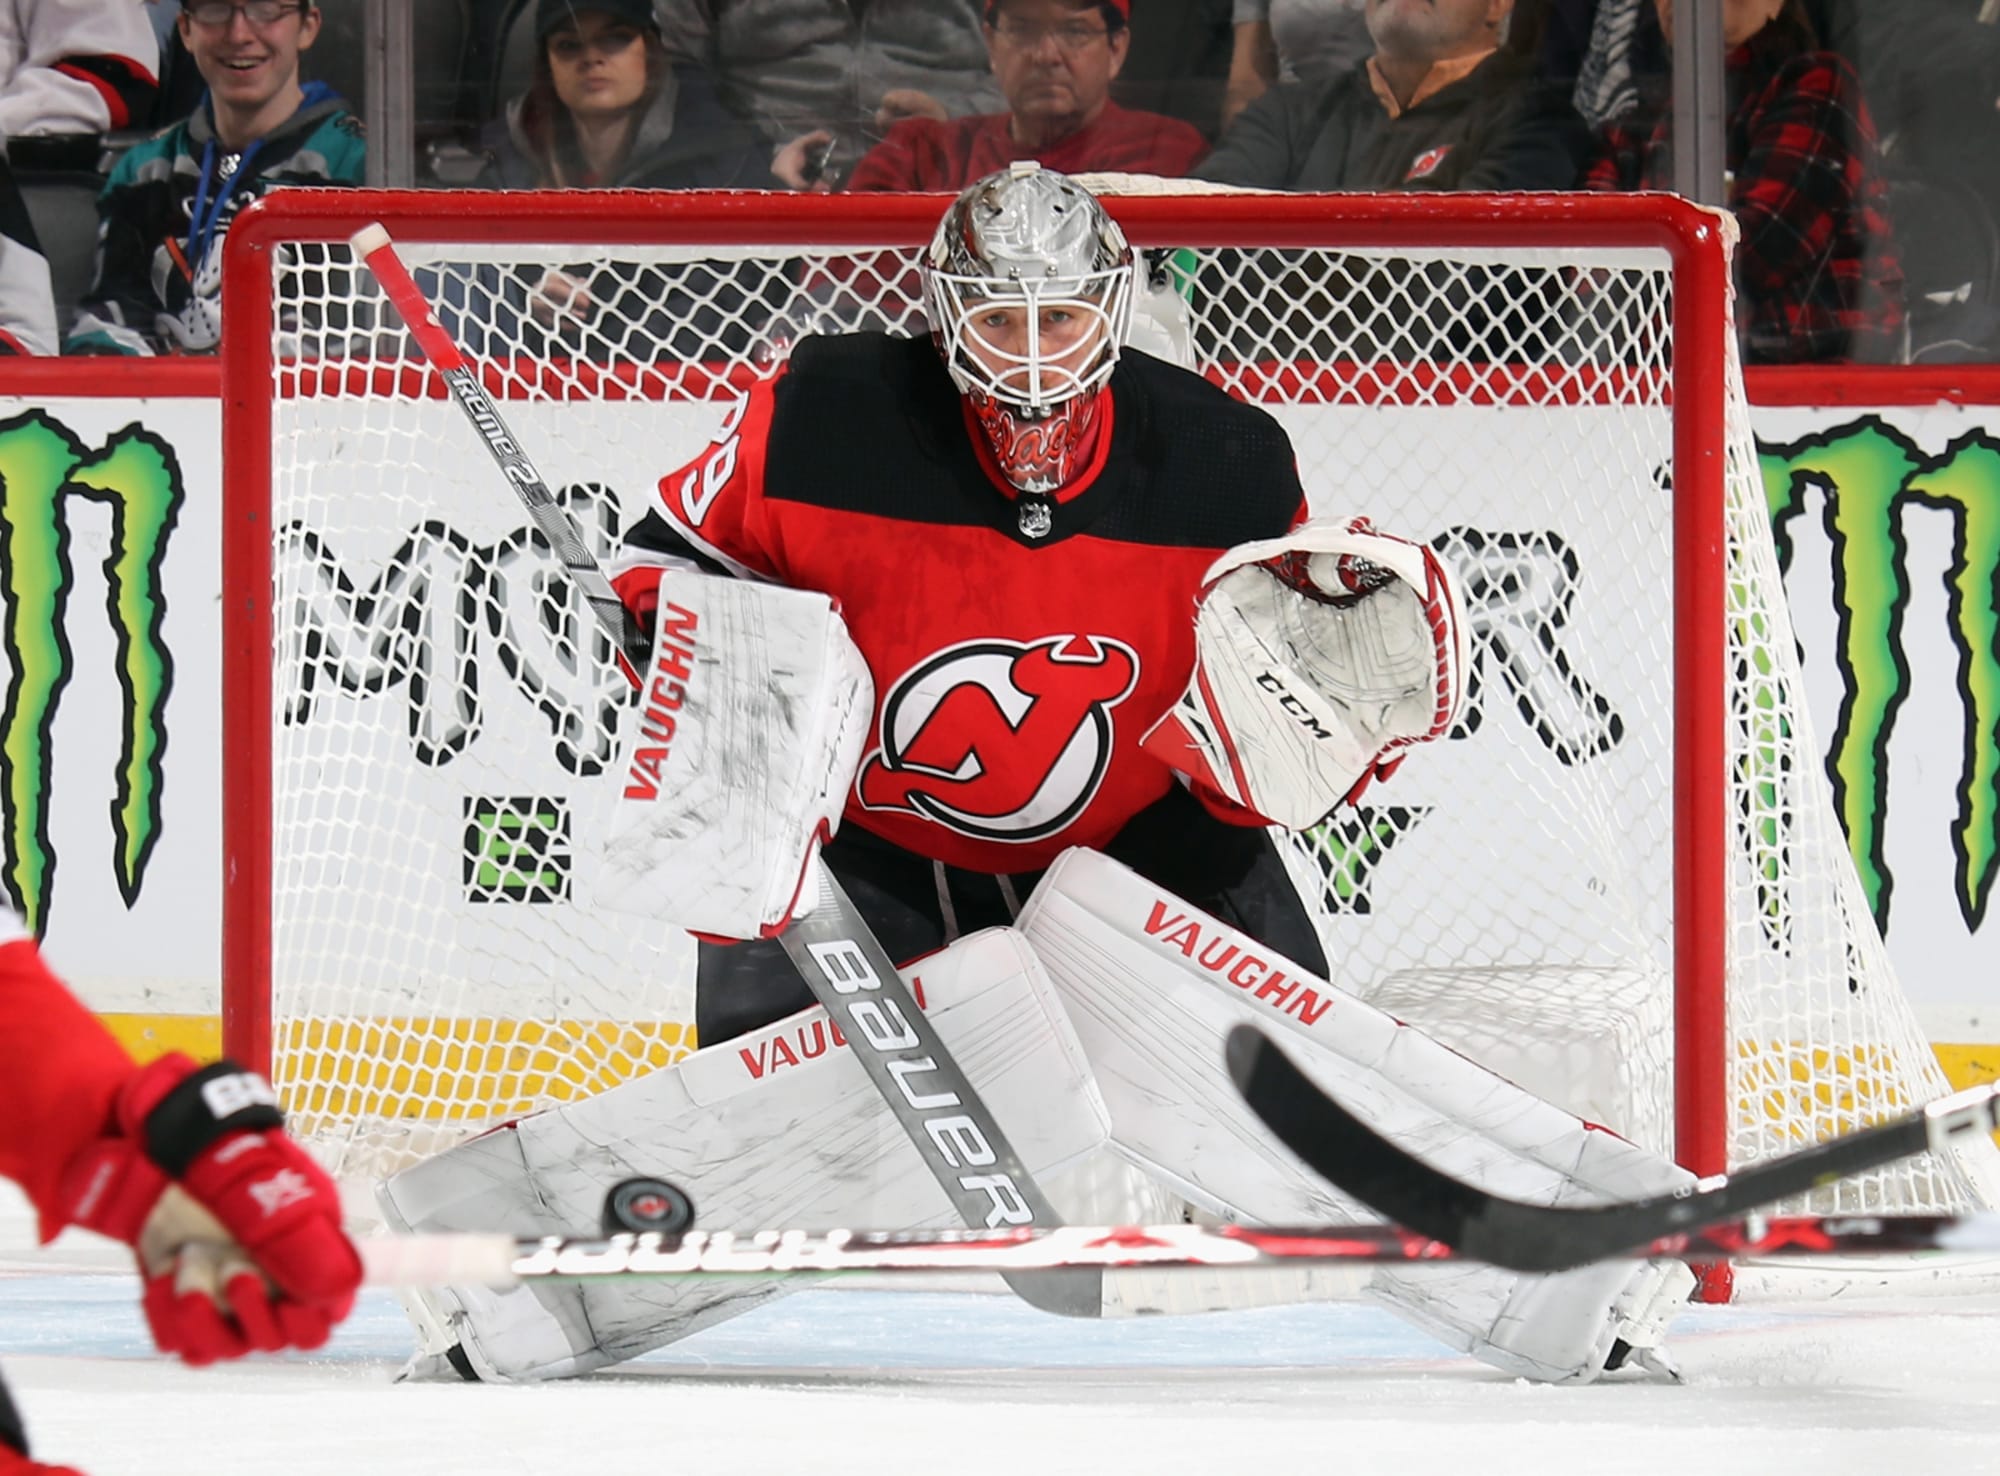 Mackenzie Blackwood Should Not Factor into the Devils Postseason Plans -  All About The Jersey